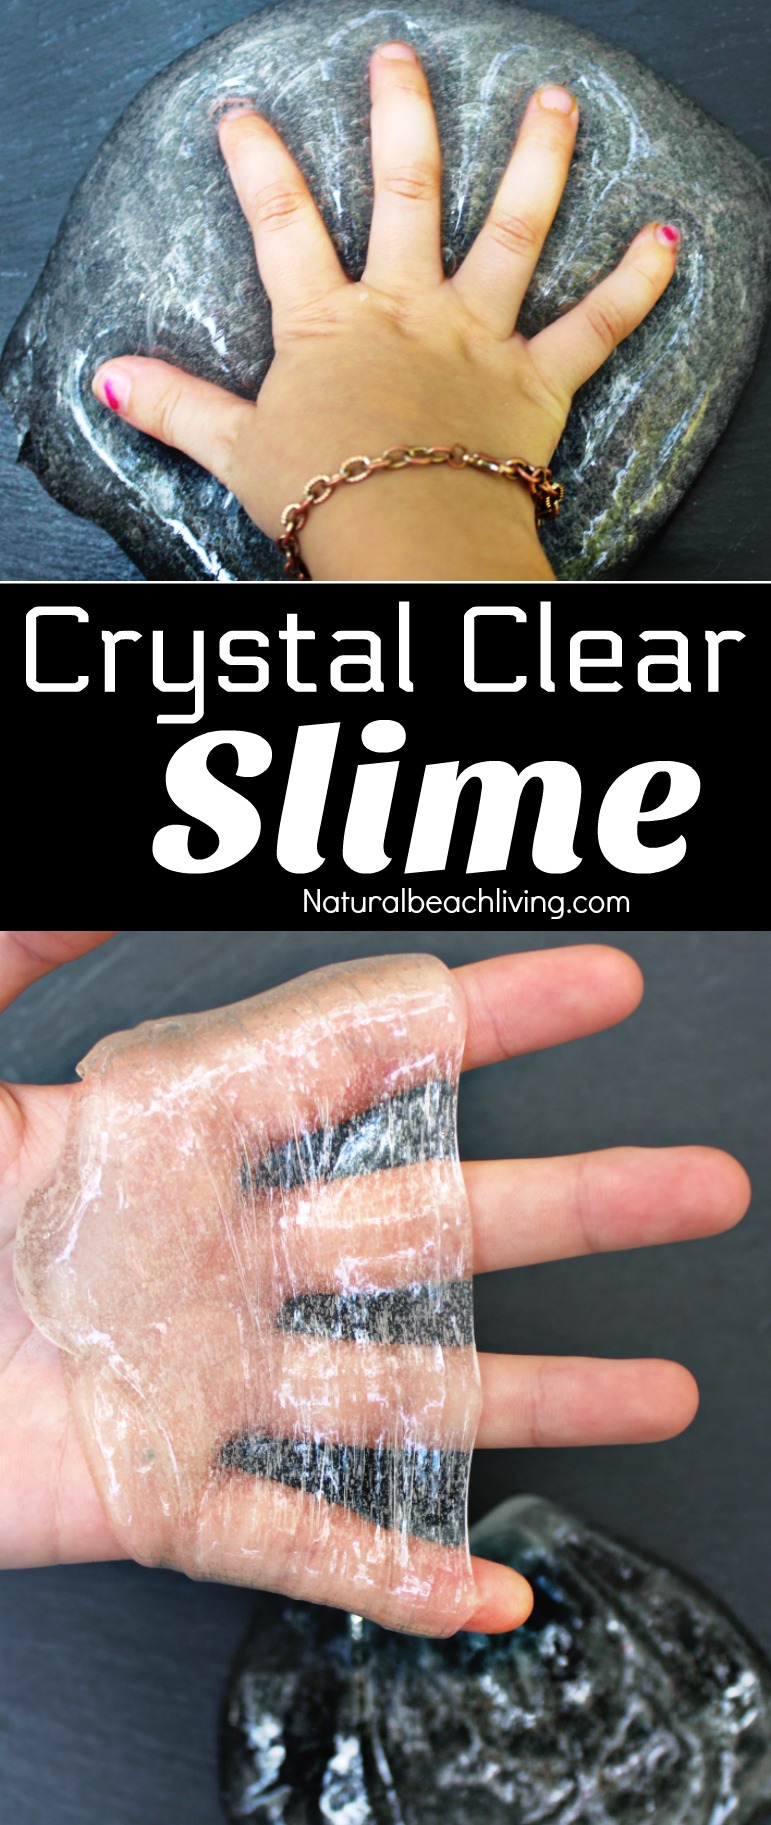 25+ Clear Slime Recipe Ideas, including how to make clear slime and slime videos, you can learn about slime science, find clear slime recipe without borax, clear slime recipe with contact solution and so many FUN homemade slime recipes. 